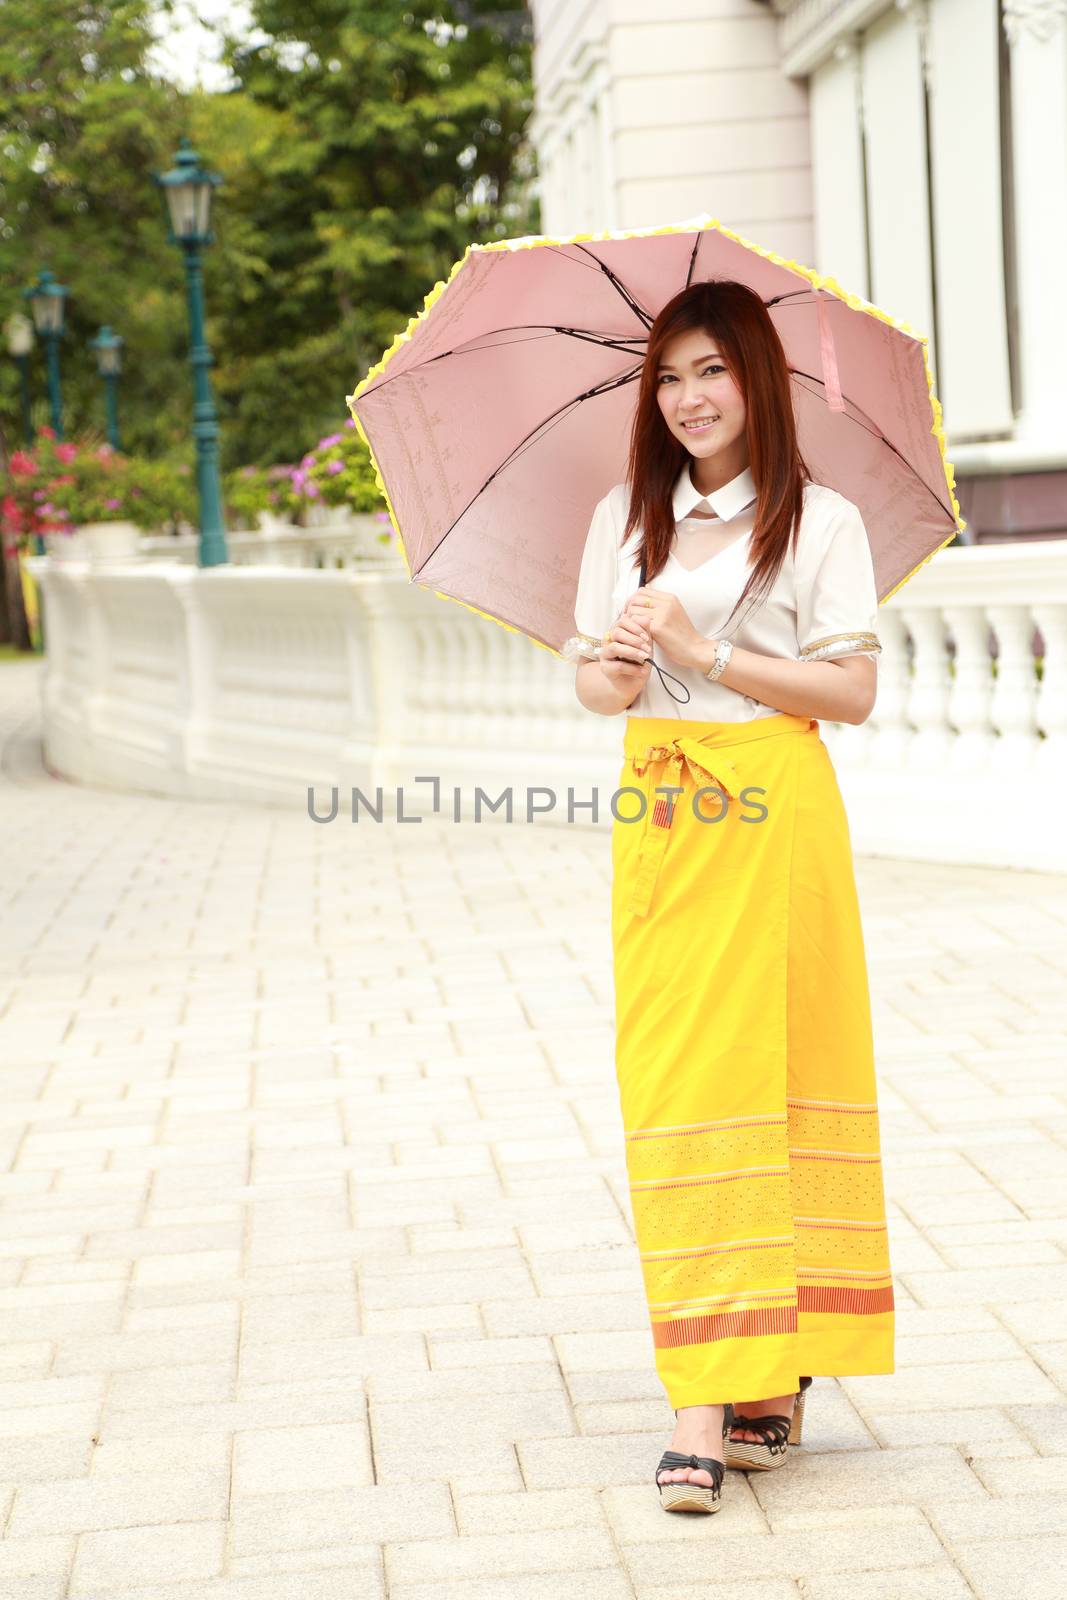 Thai girl dressing and umbrella with traditional style by geargodz